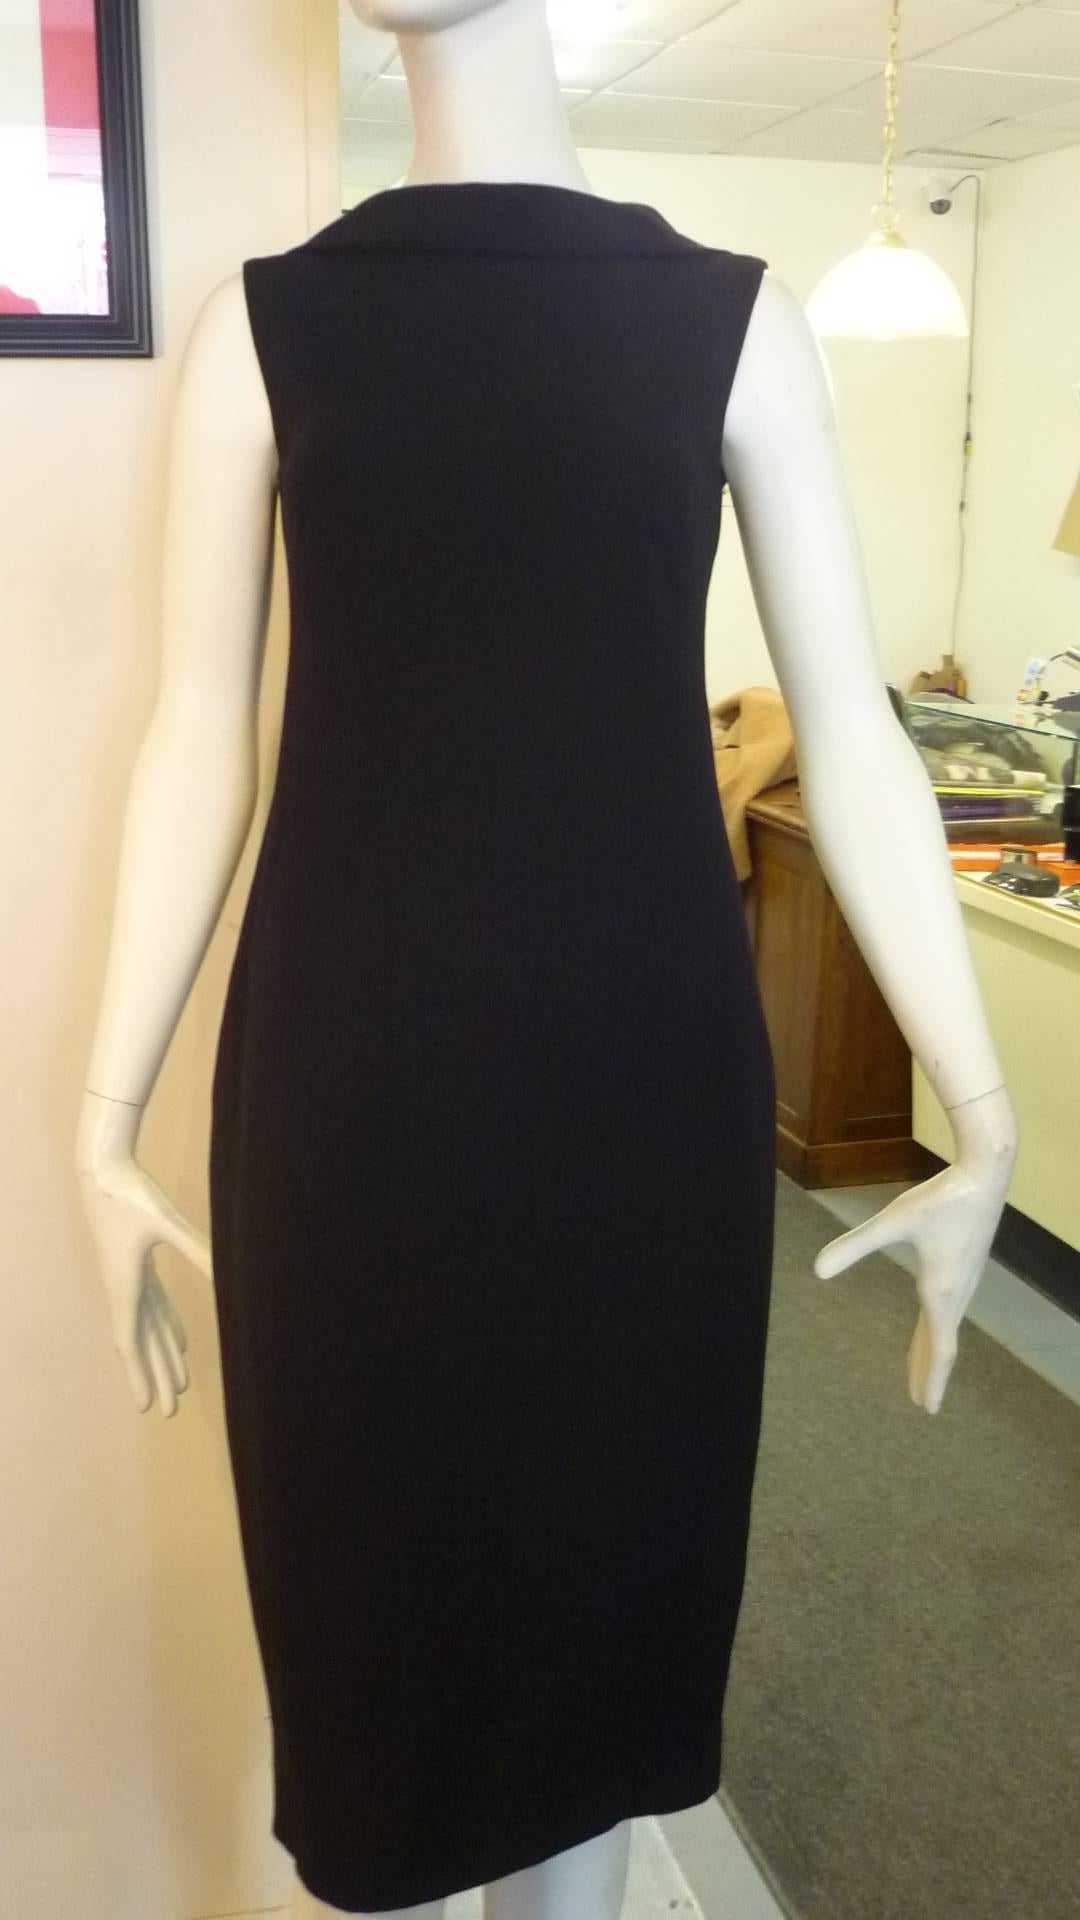 Such a wonderful dress which would be a staple LBD. The juxtaposiion of the high front to and low rounded back, couple with the discreet darting at the bust, and the hidden back zip closure.

